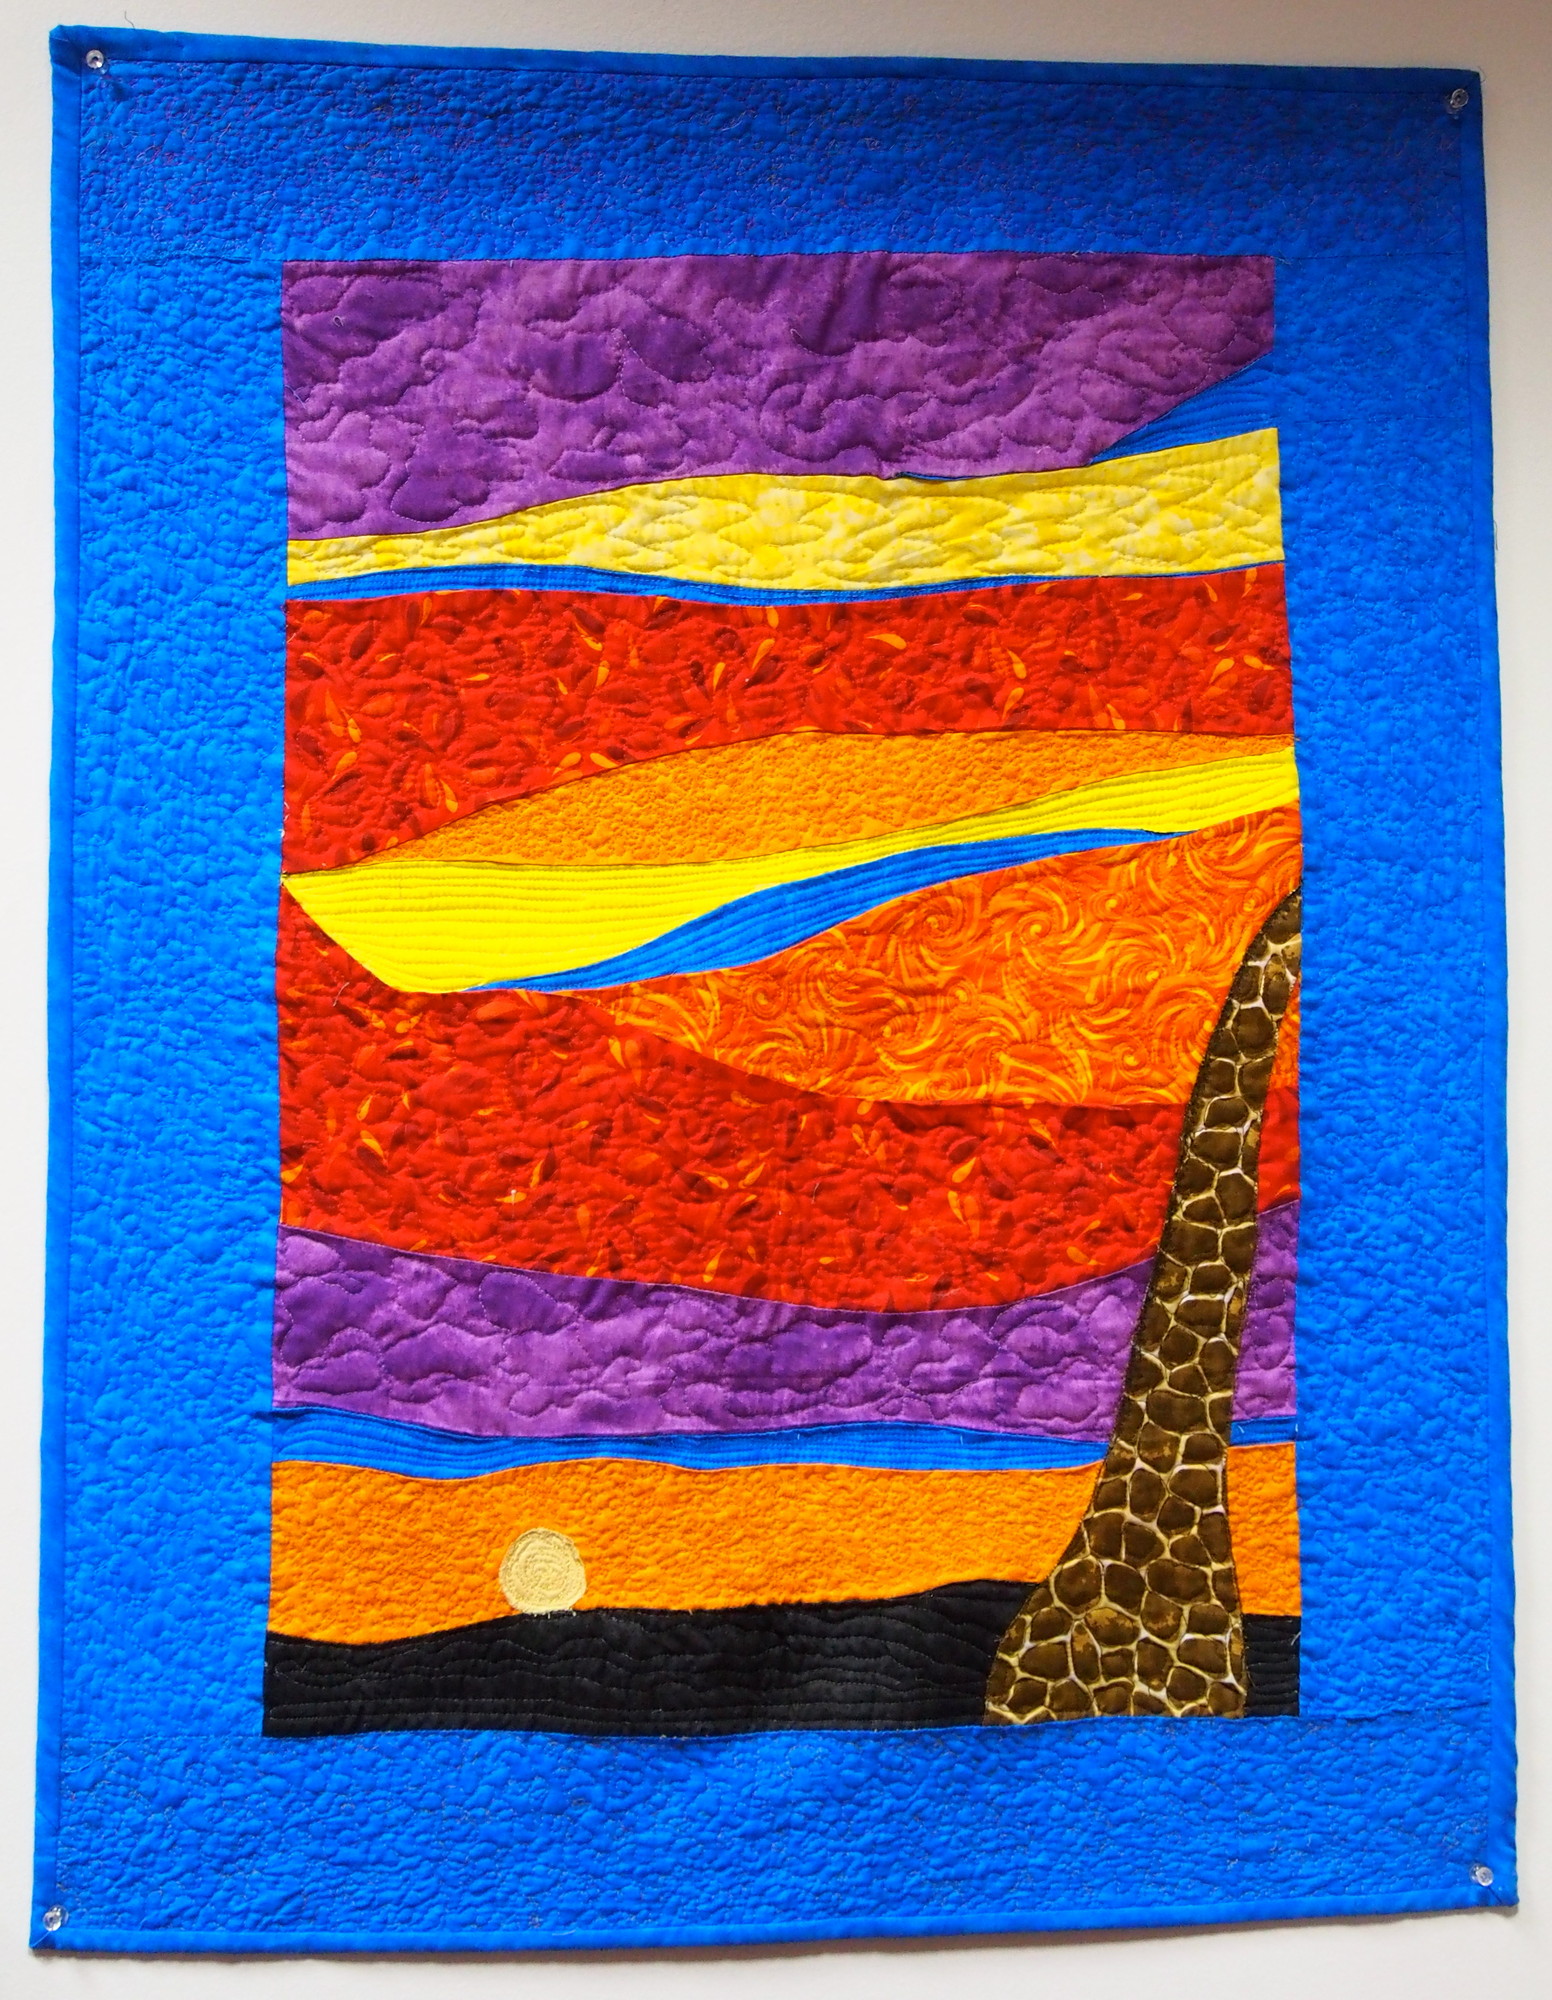 This quilt, Sunset on the Serengeti, was inspired by a conversation with the artist’s daughter. The discussion was about clashing colors and how hues that don’t complement one another in fashion often do so in nature.